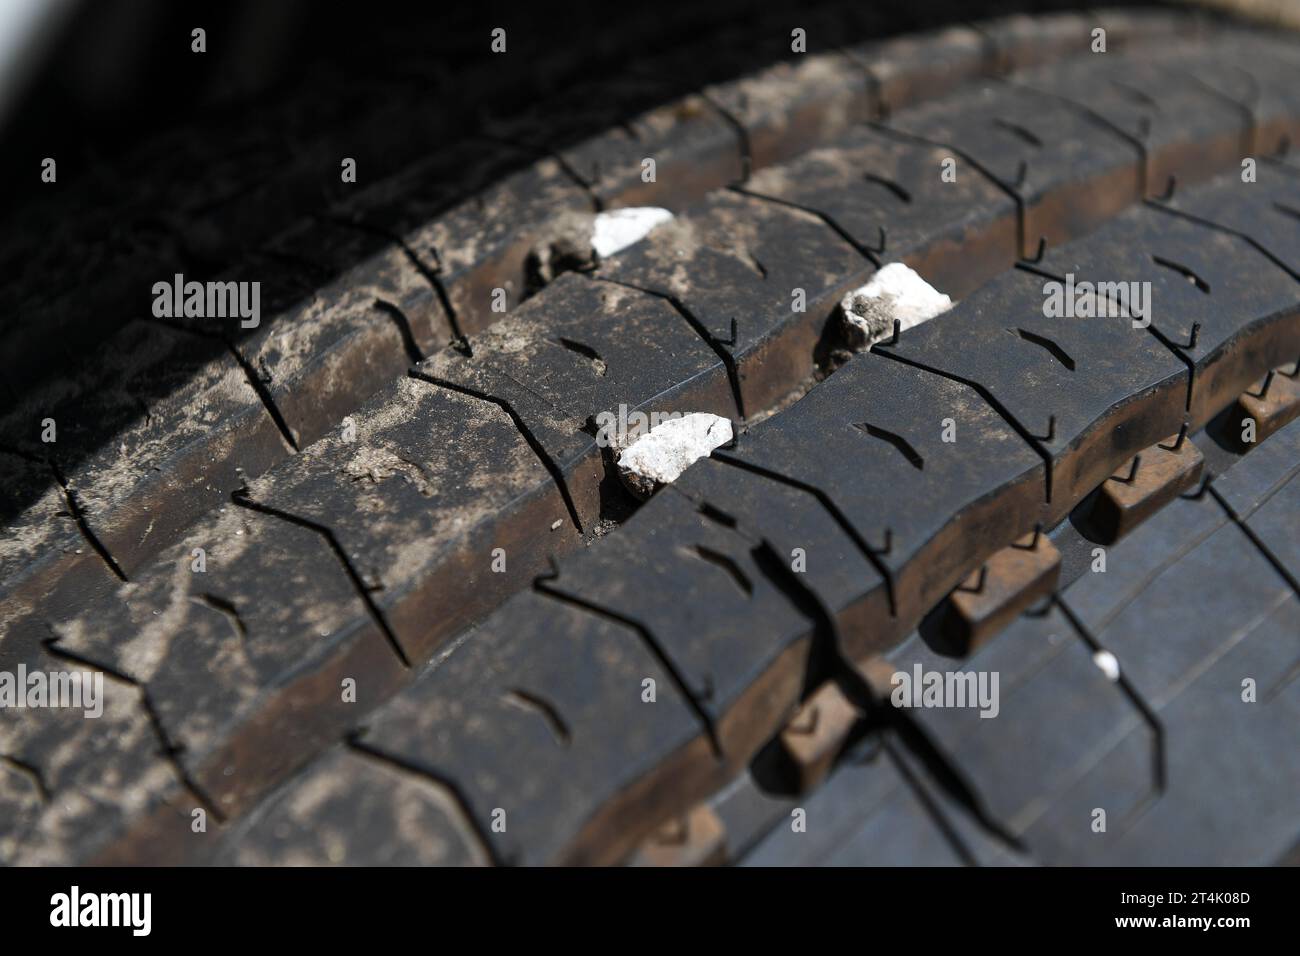 Small stones caught in the tread of truck tyre which can cause a danger to other motorists flying out at speed. Stock Photo